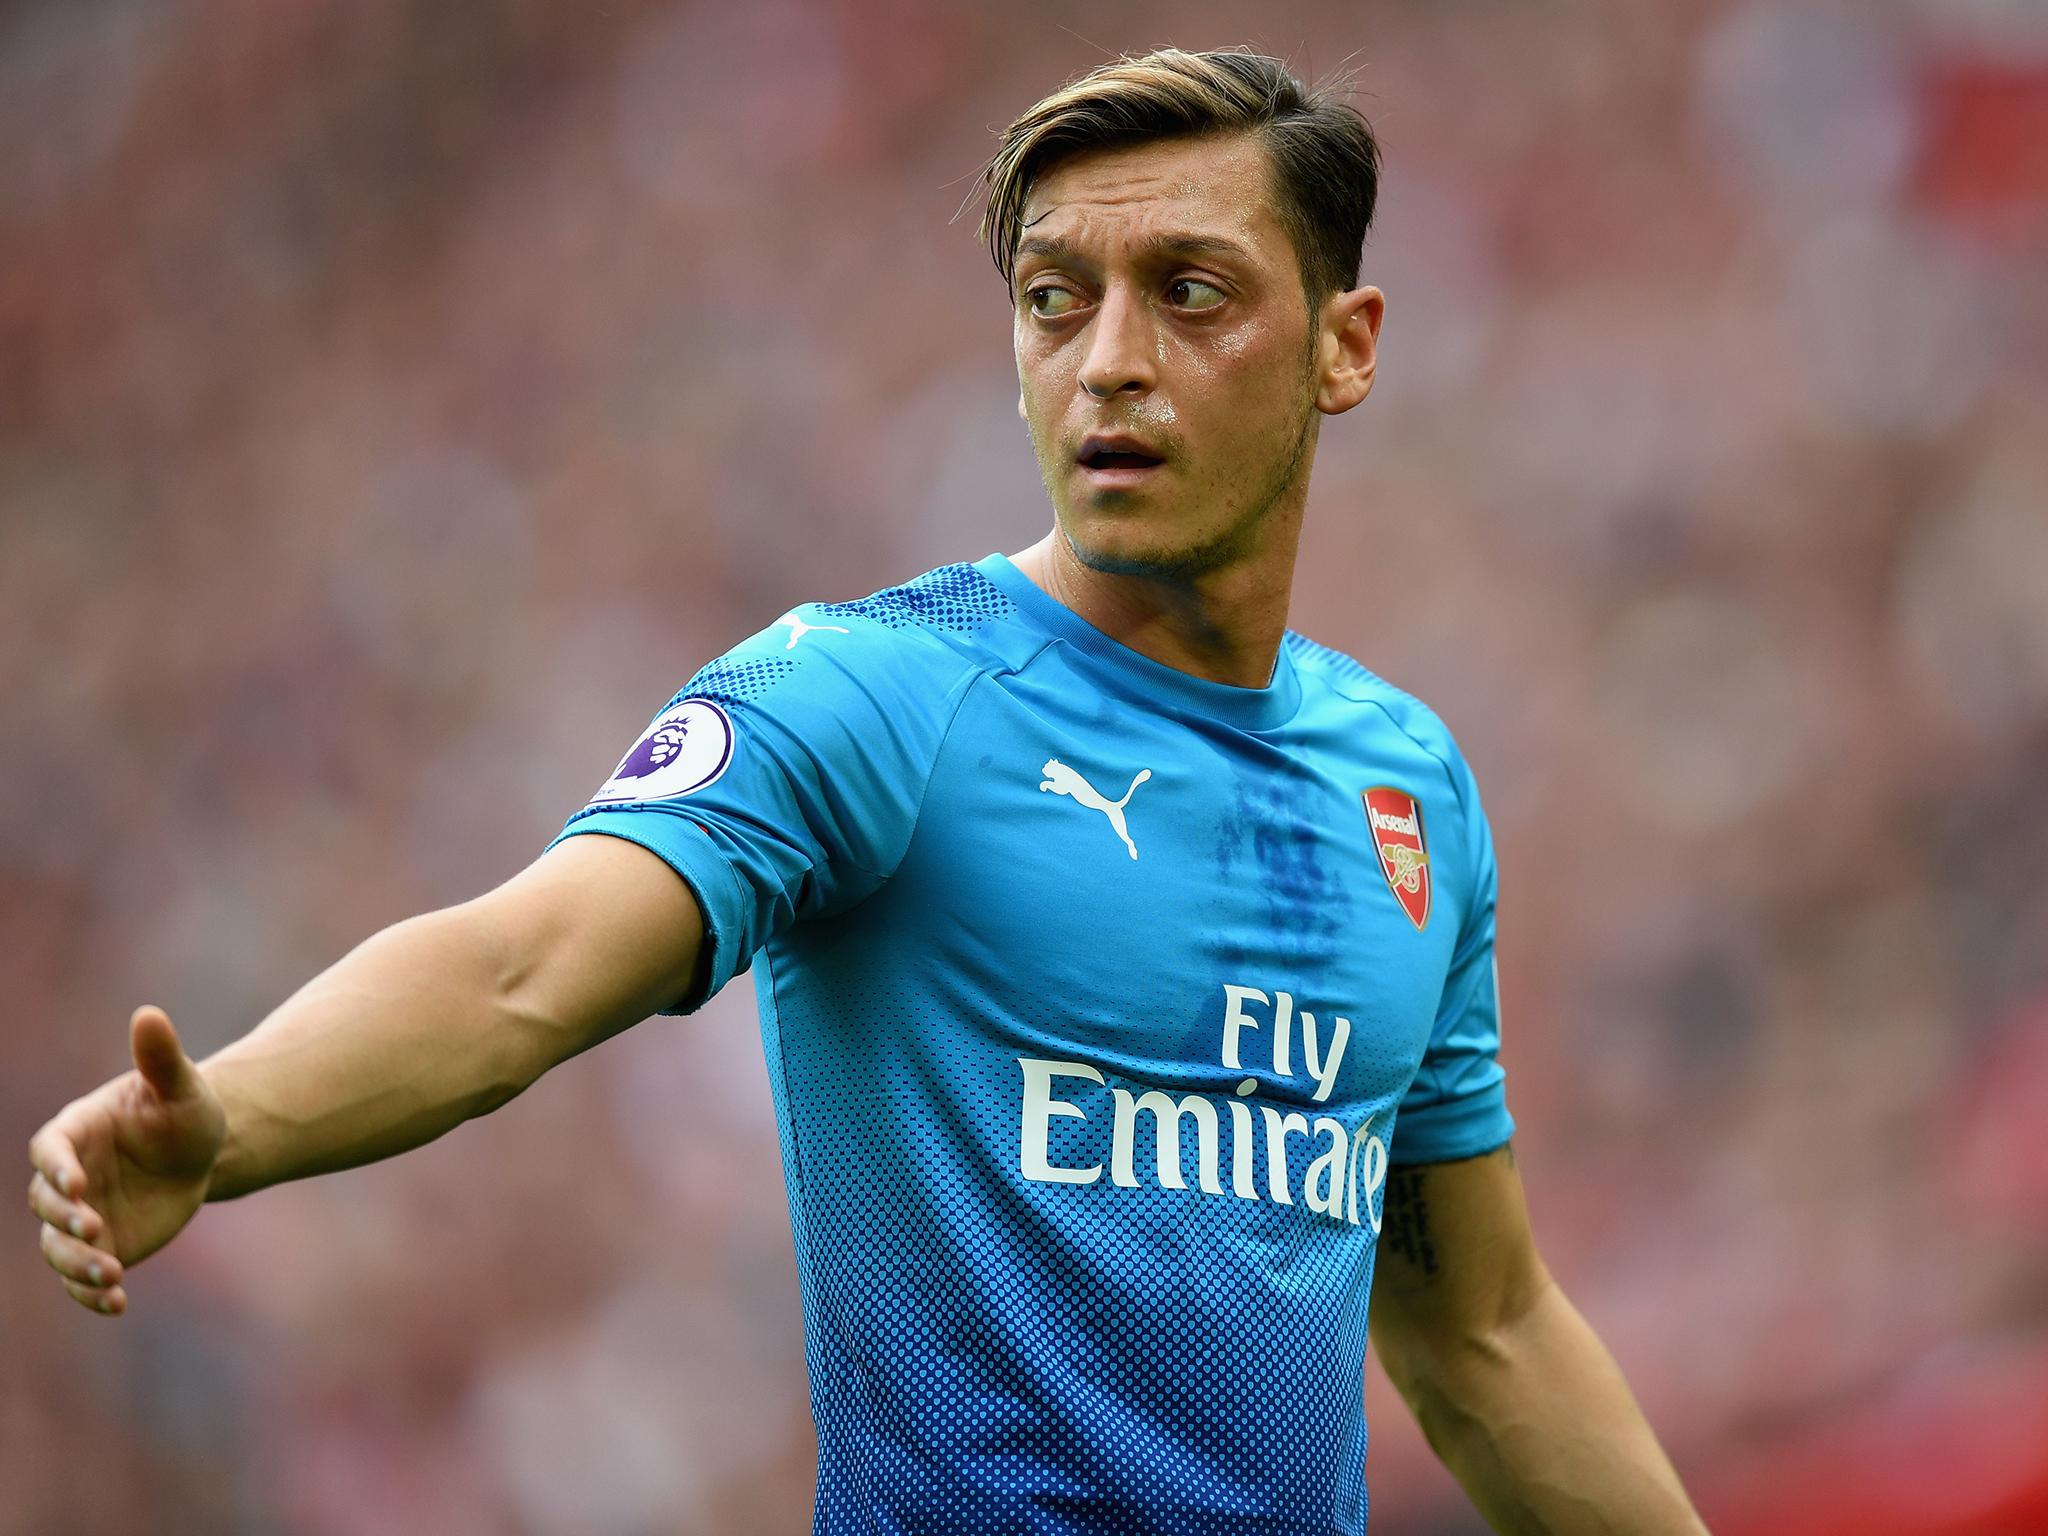 Ian Wright questioned why Mesut Ozil has not signed a new Arsenal contract